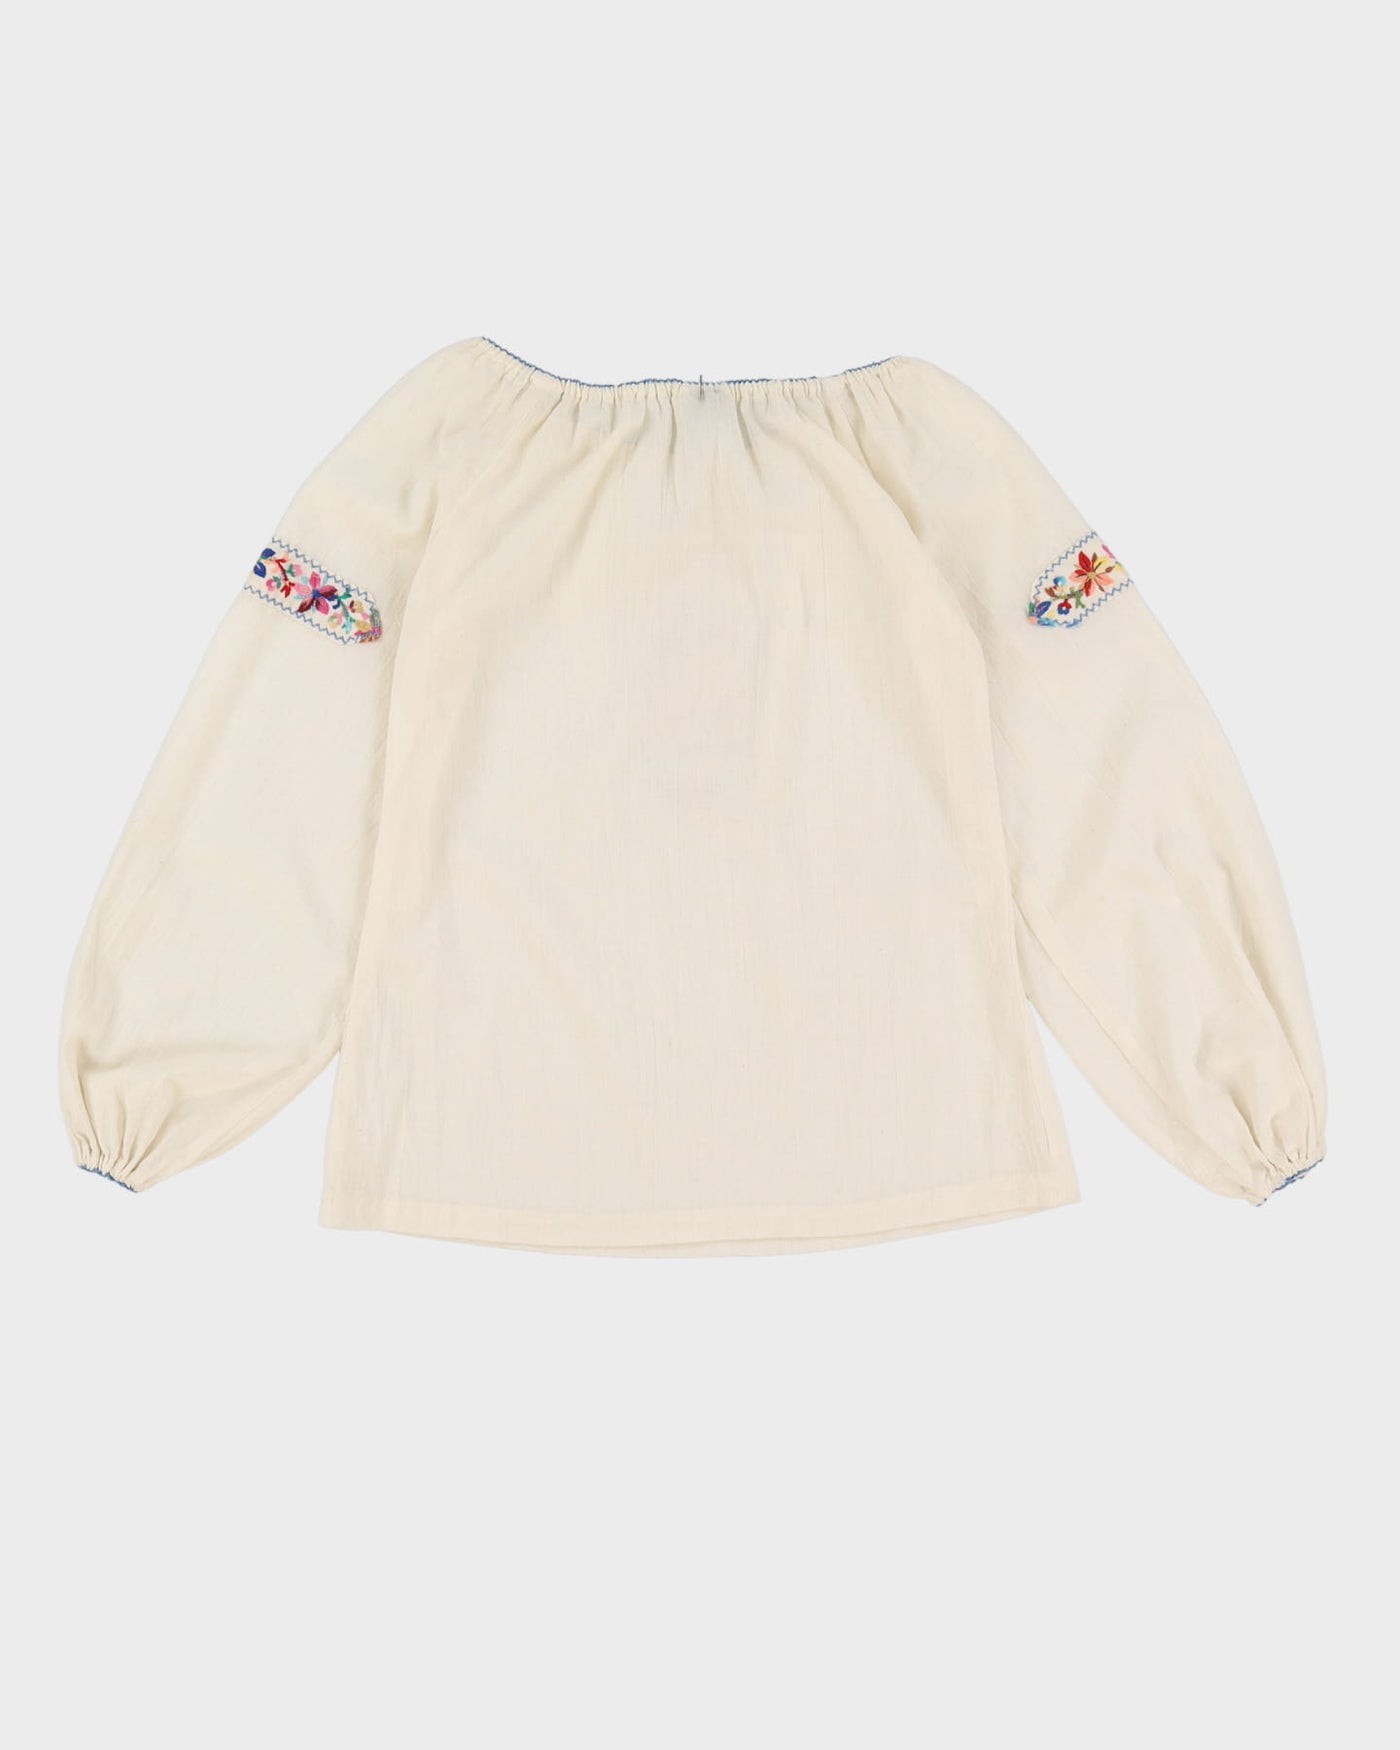 00s Cream Embroidered Cotton Blouse - S